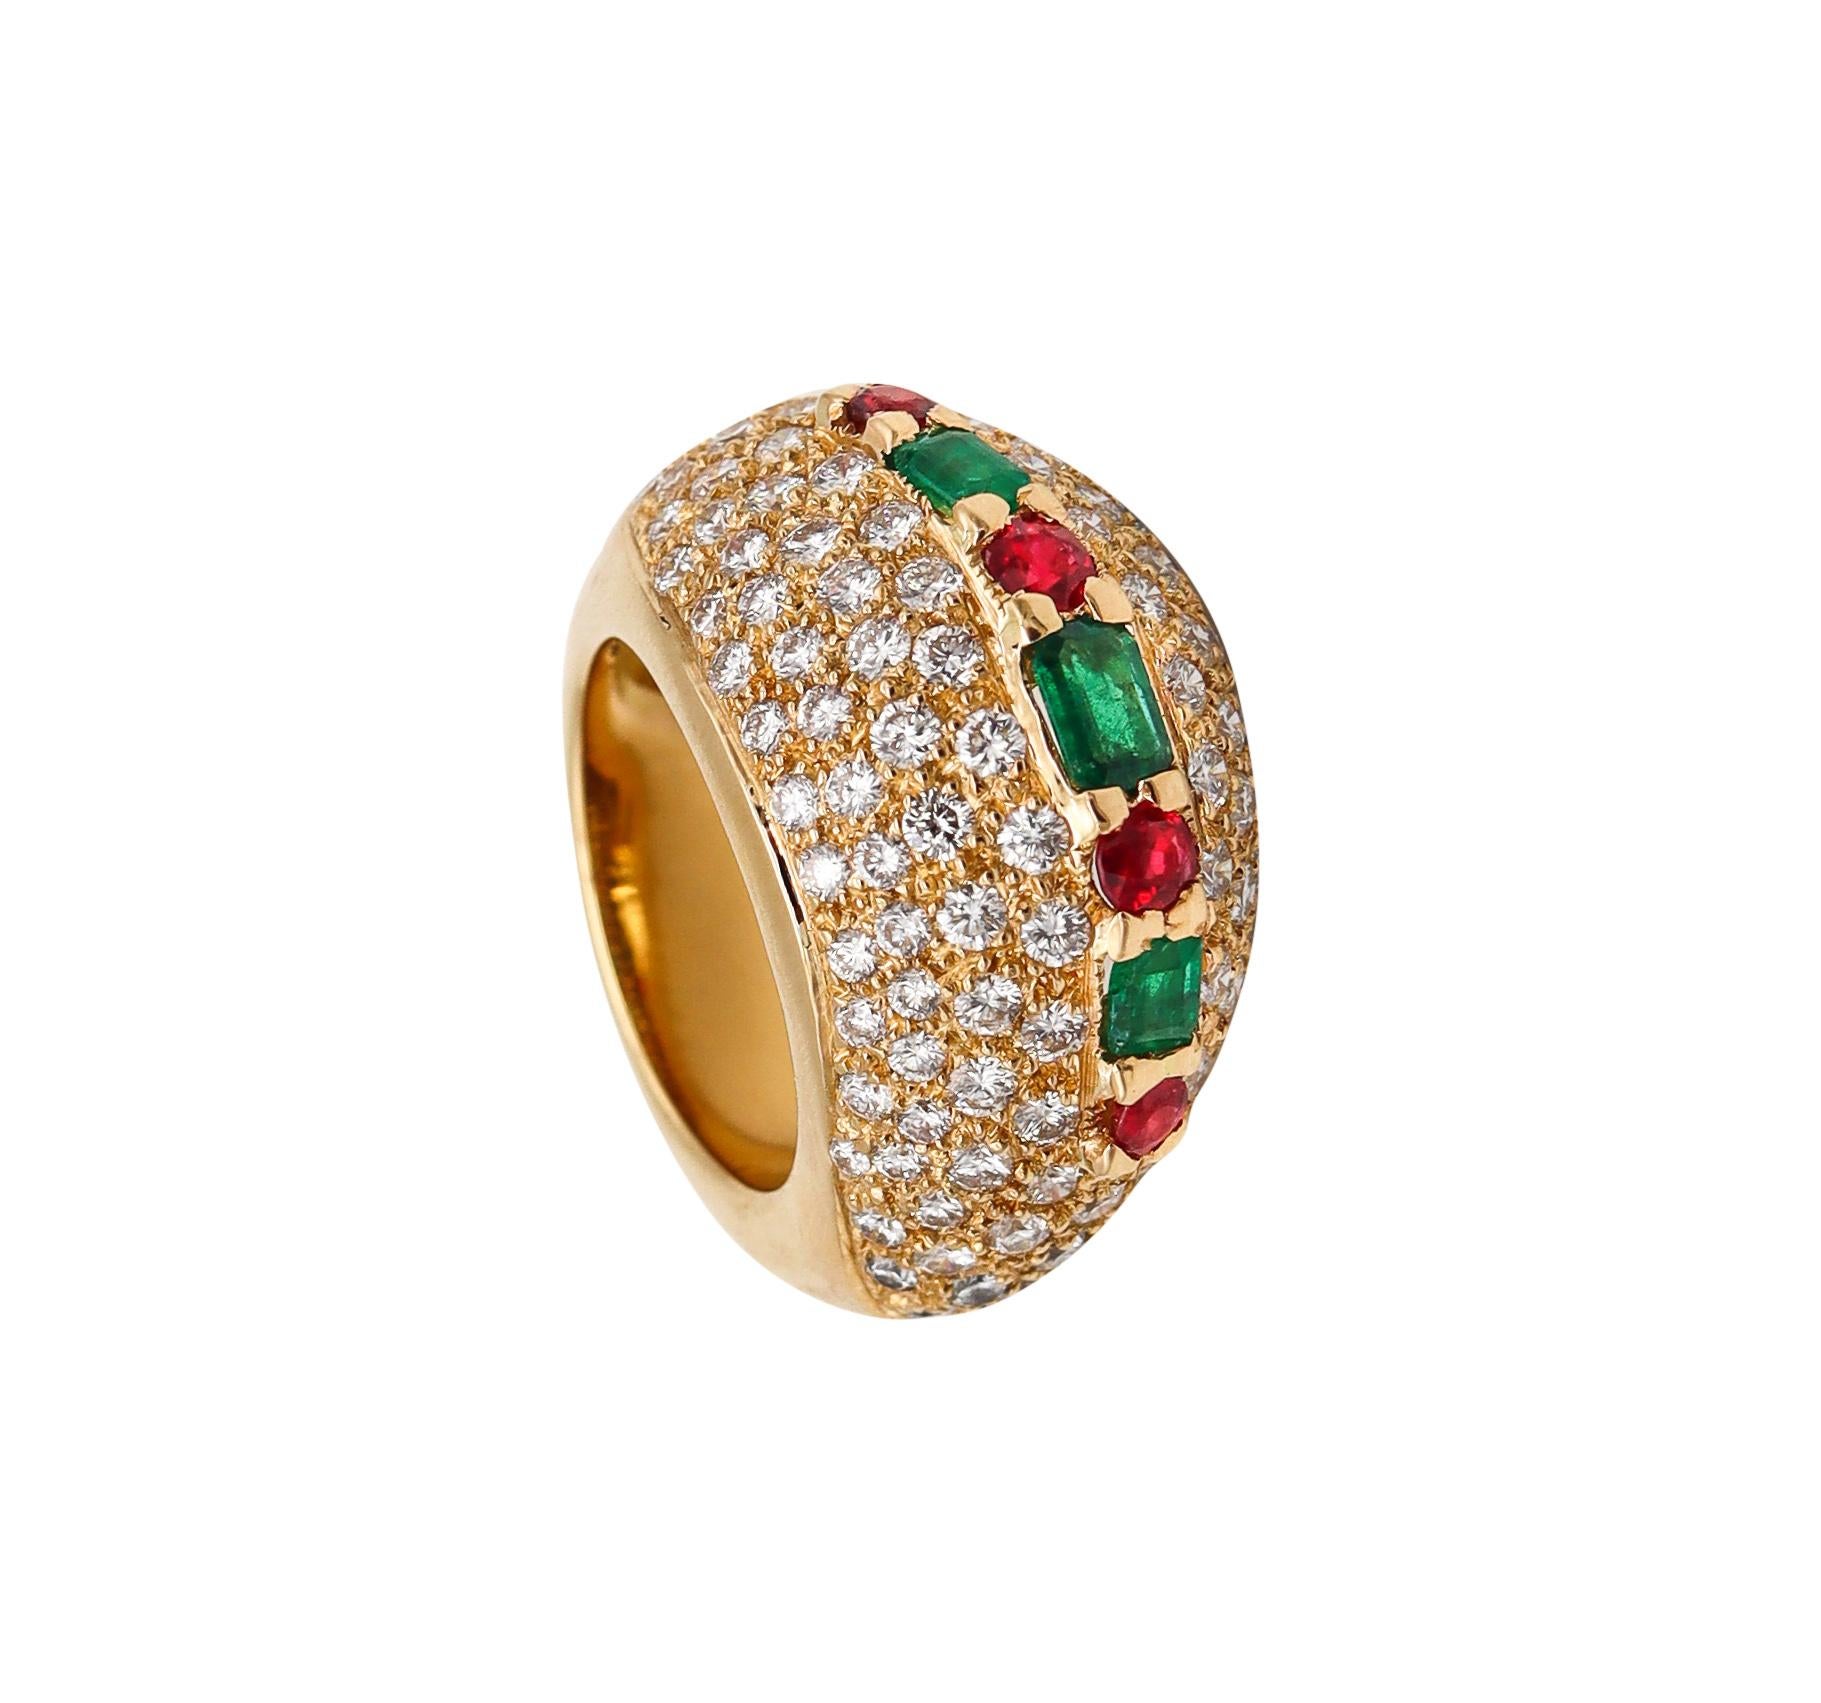 French Modern Cocktail Ring in 18Kt Gold with 7.32 Cts Diamonds Emerald Rubies 4